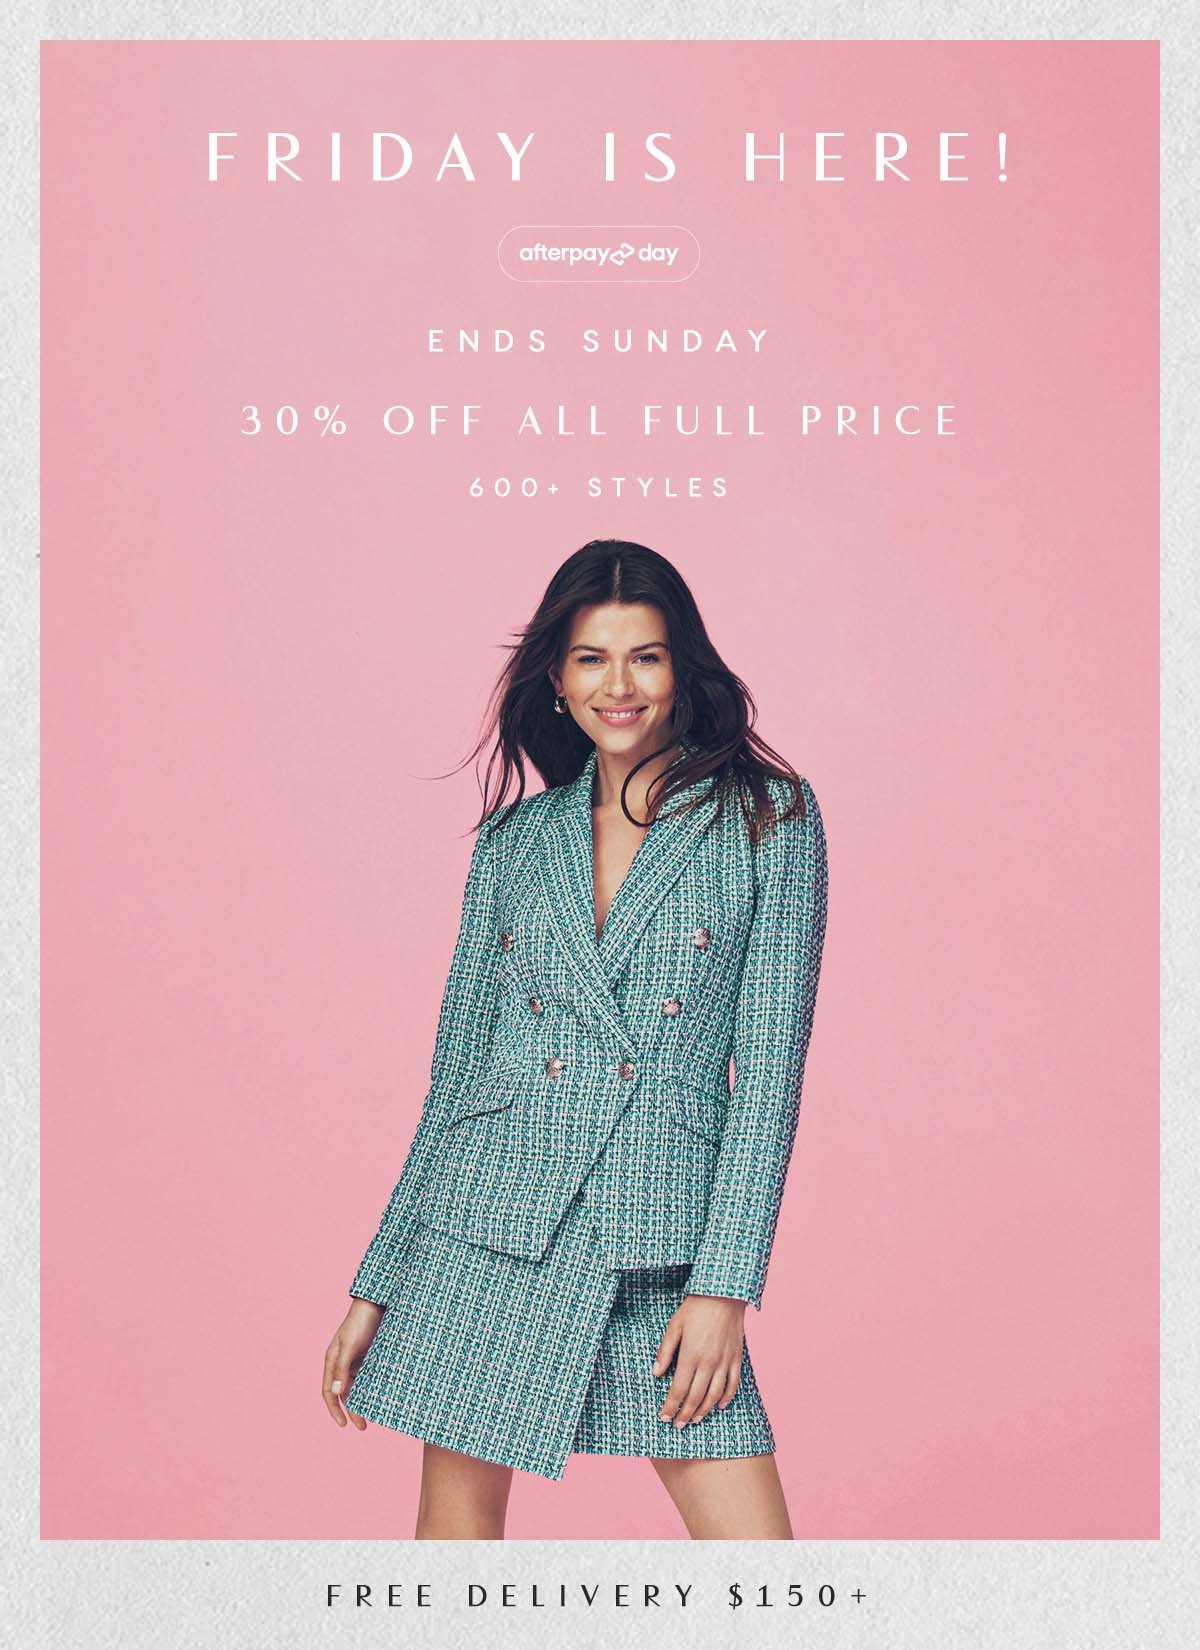 New Season. Afterpay Day. Ends Sunday. Online Only. 30% Off All Full Price. 600+ Styles. Free Delivery $150